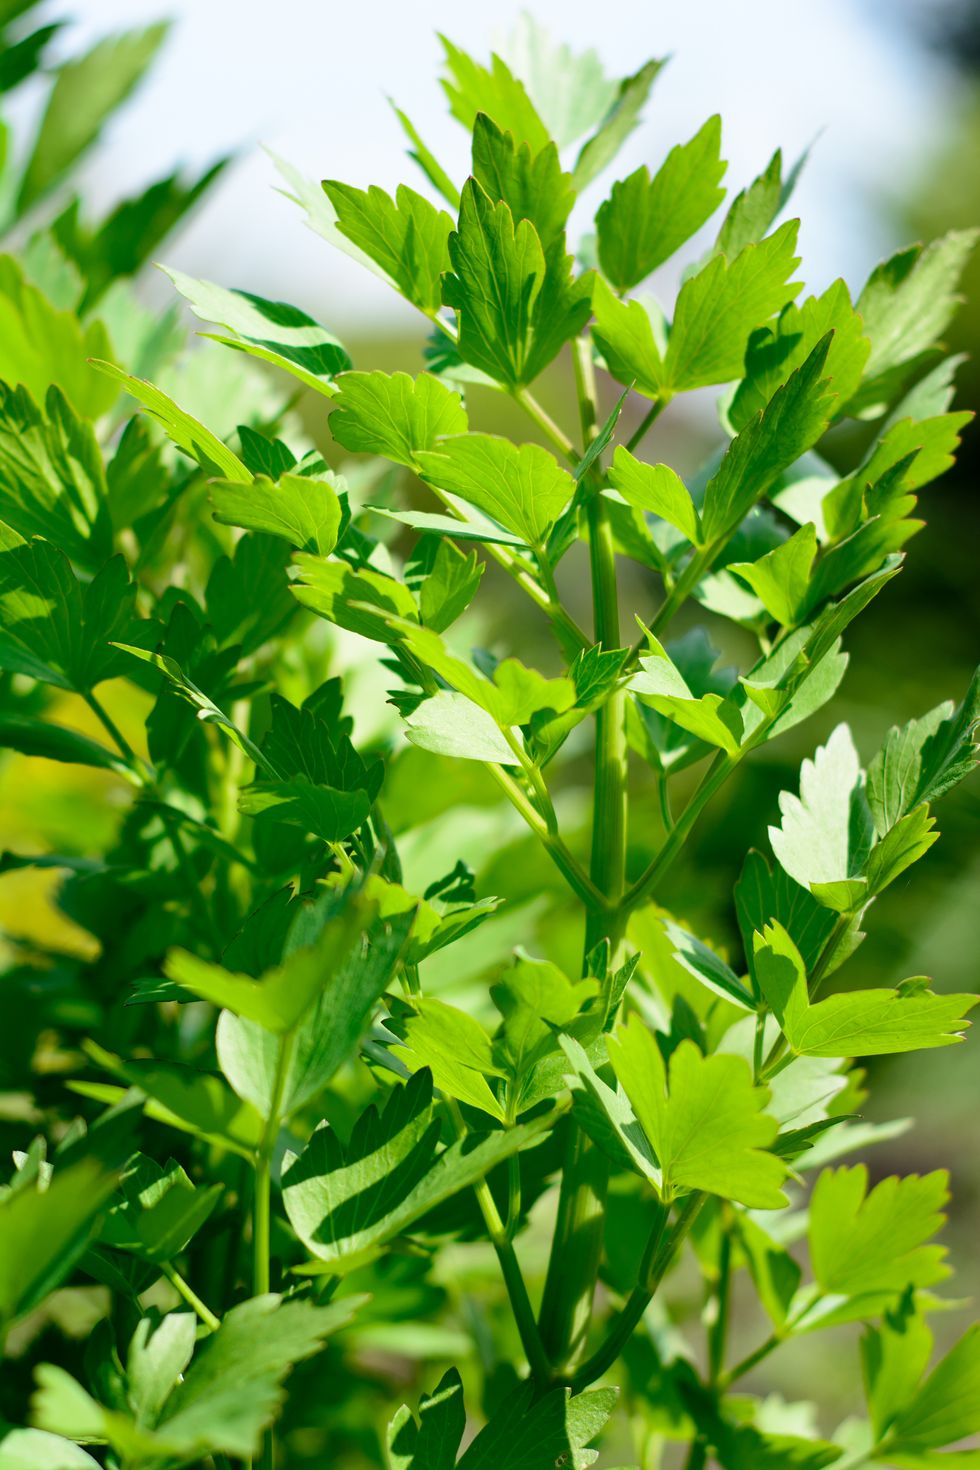 How to Dry Herbs - Parsley, Oregano, Chives, Lovage and more